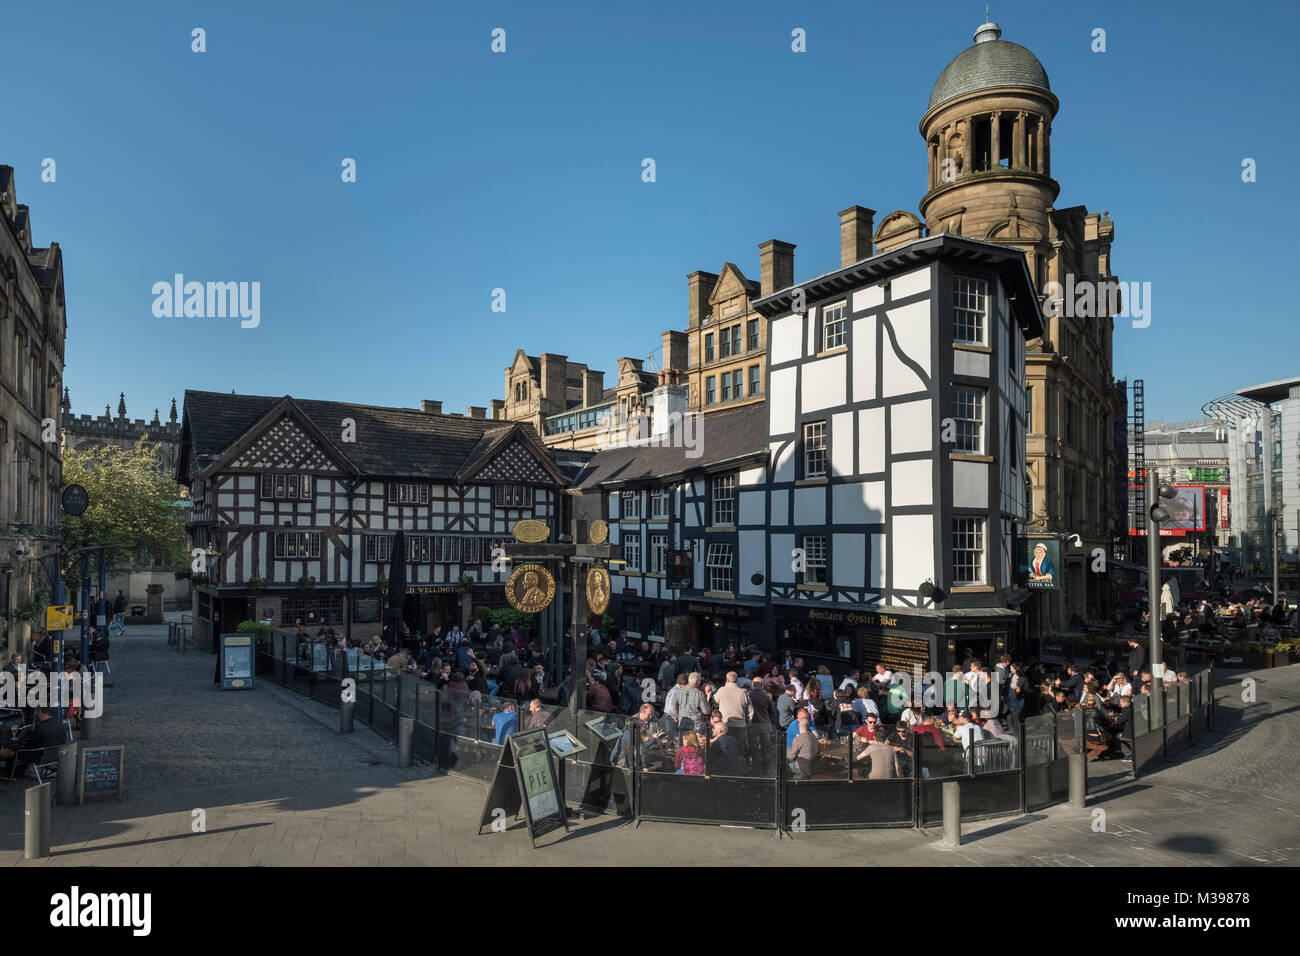 Shambles Square and The Shambles, Manchester, Greater Manchester, England, UK Stock Photo